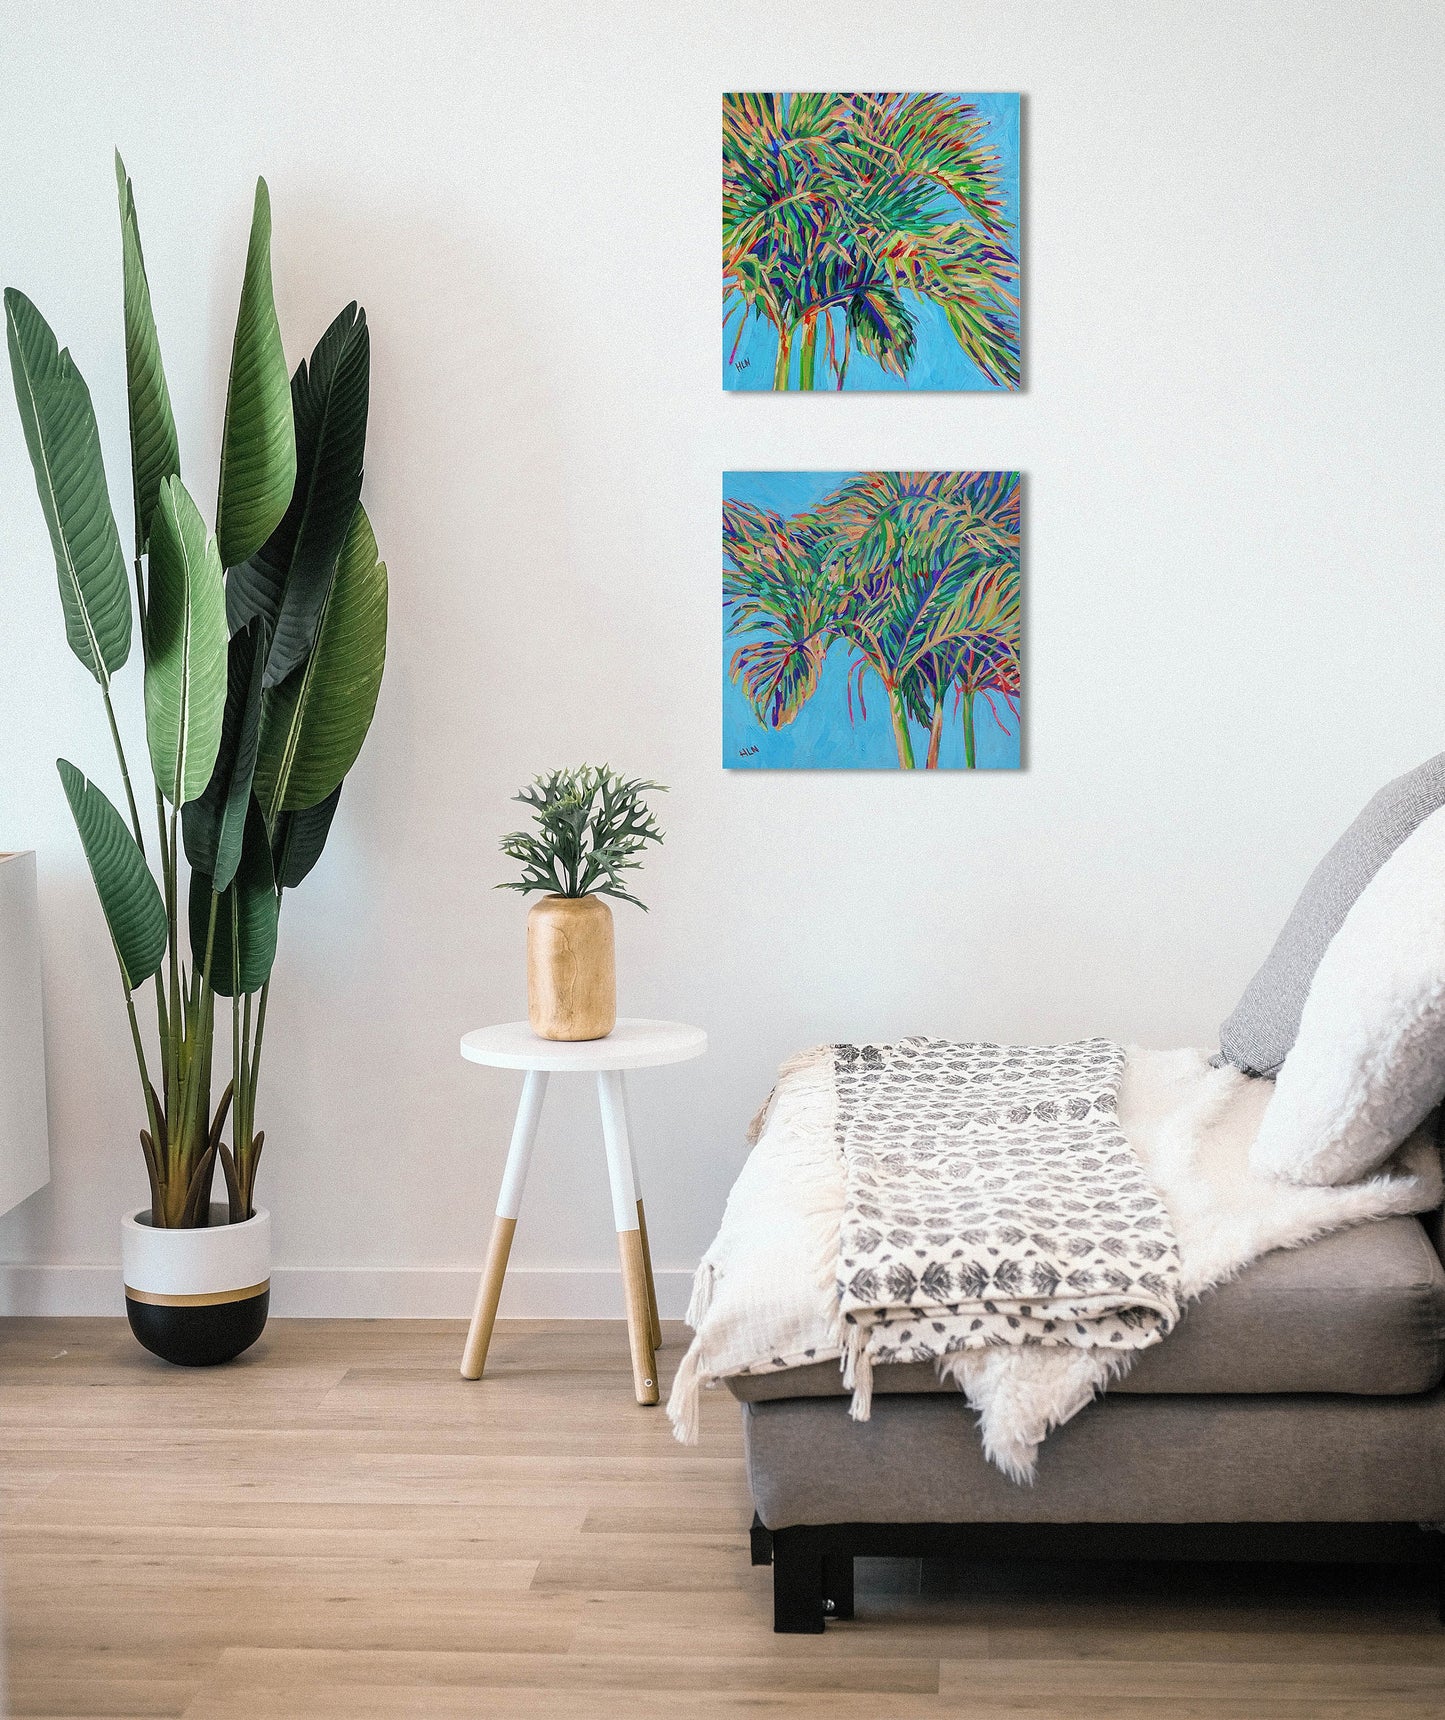 two Christmas tree palm paintings in living room setting